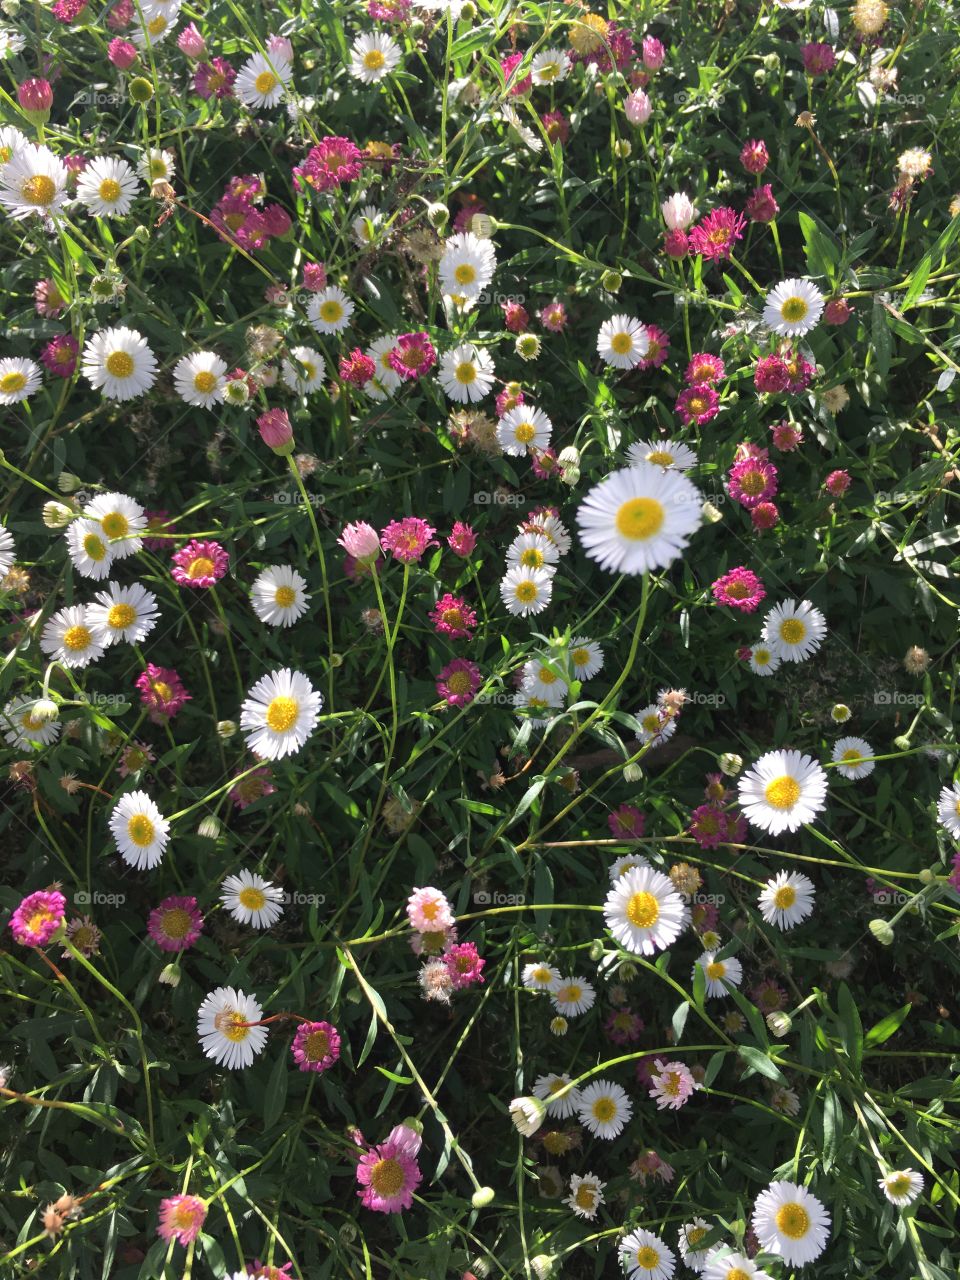 Pink and white daisy-like flowers